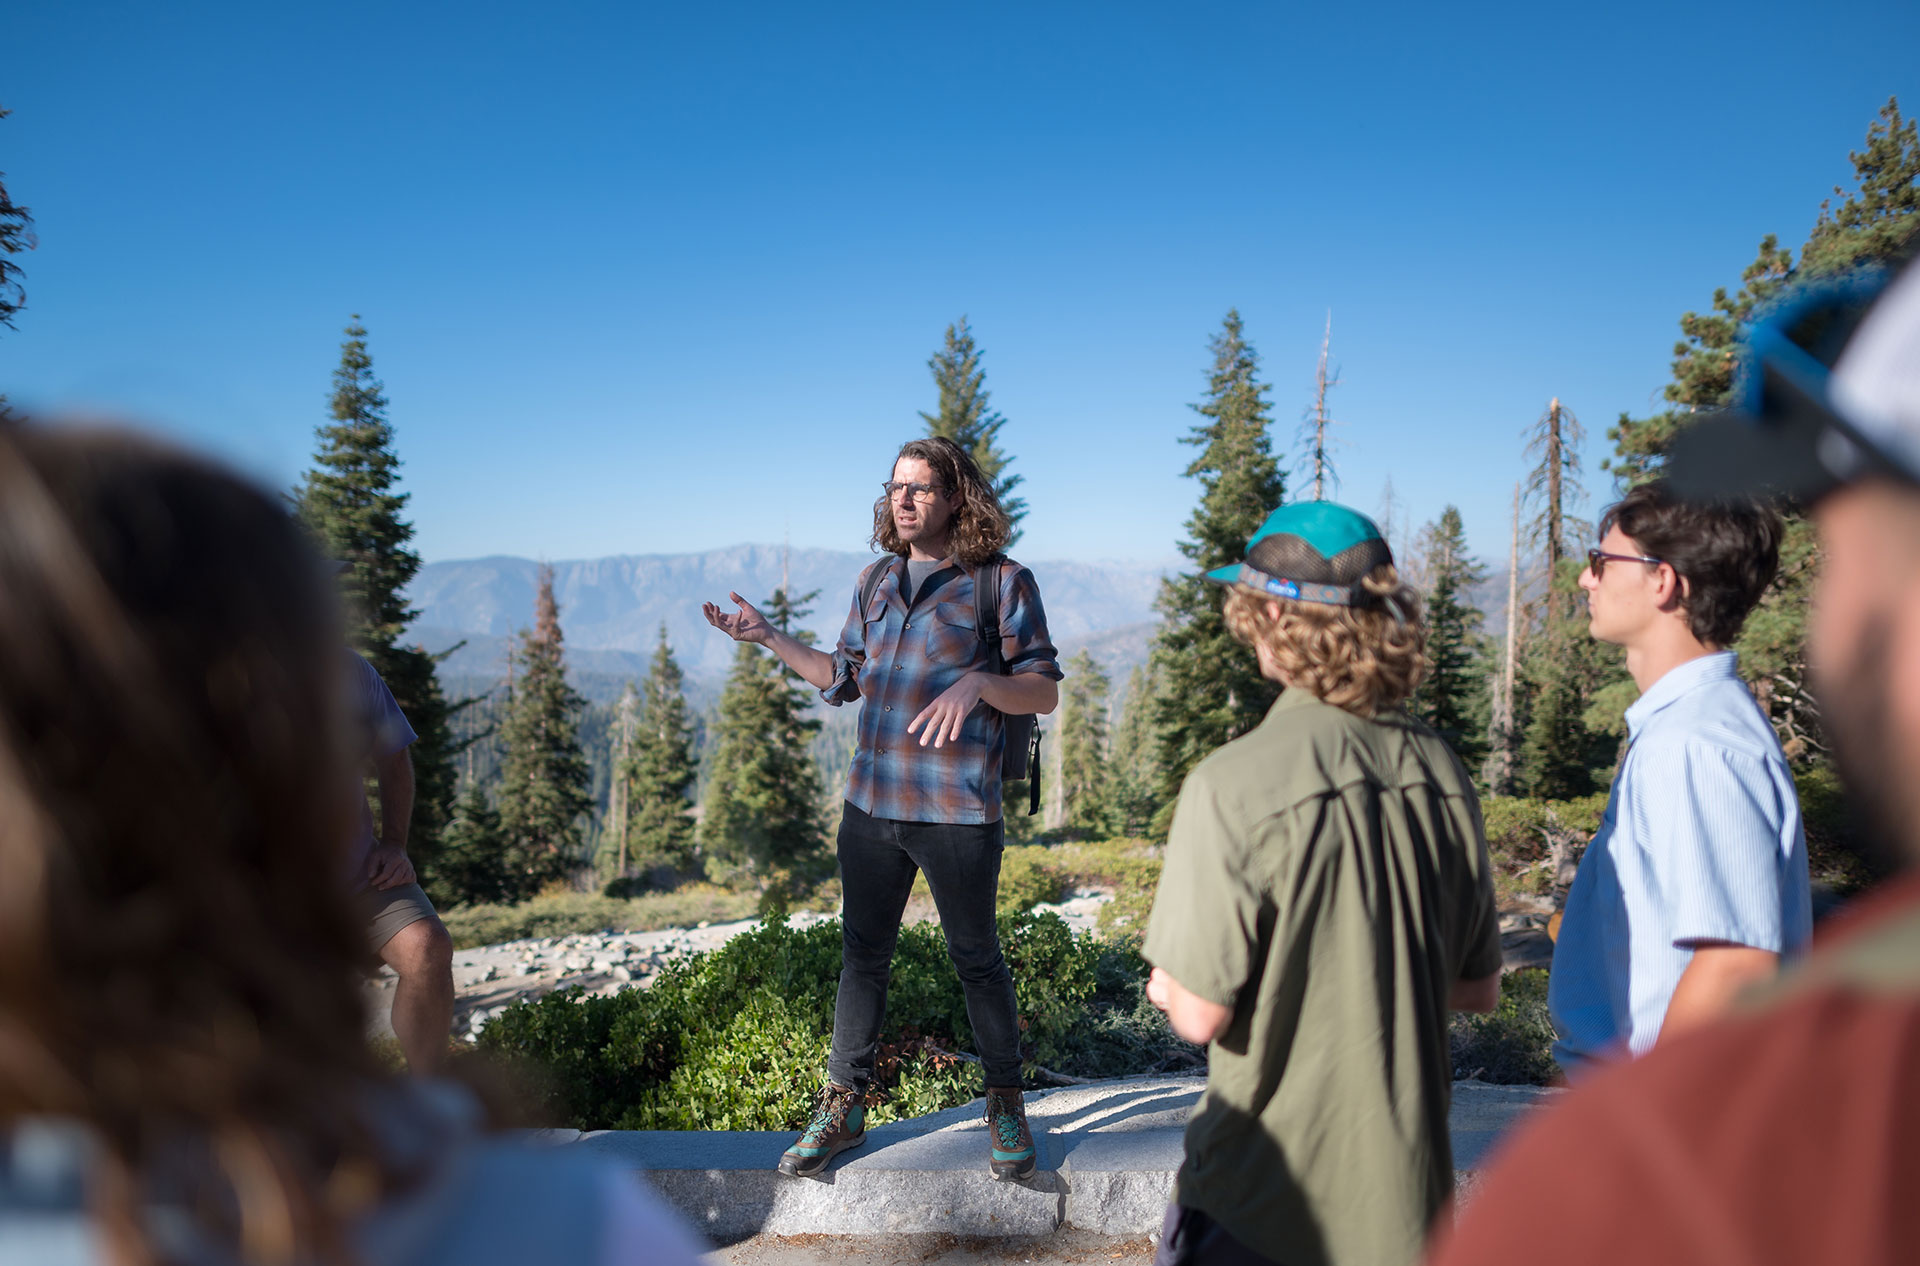 Professor Jesse Engebretson is standing on a rock overlooking a valley of trees. He is addressing a group of students during a field trip.